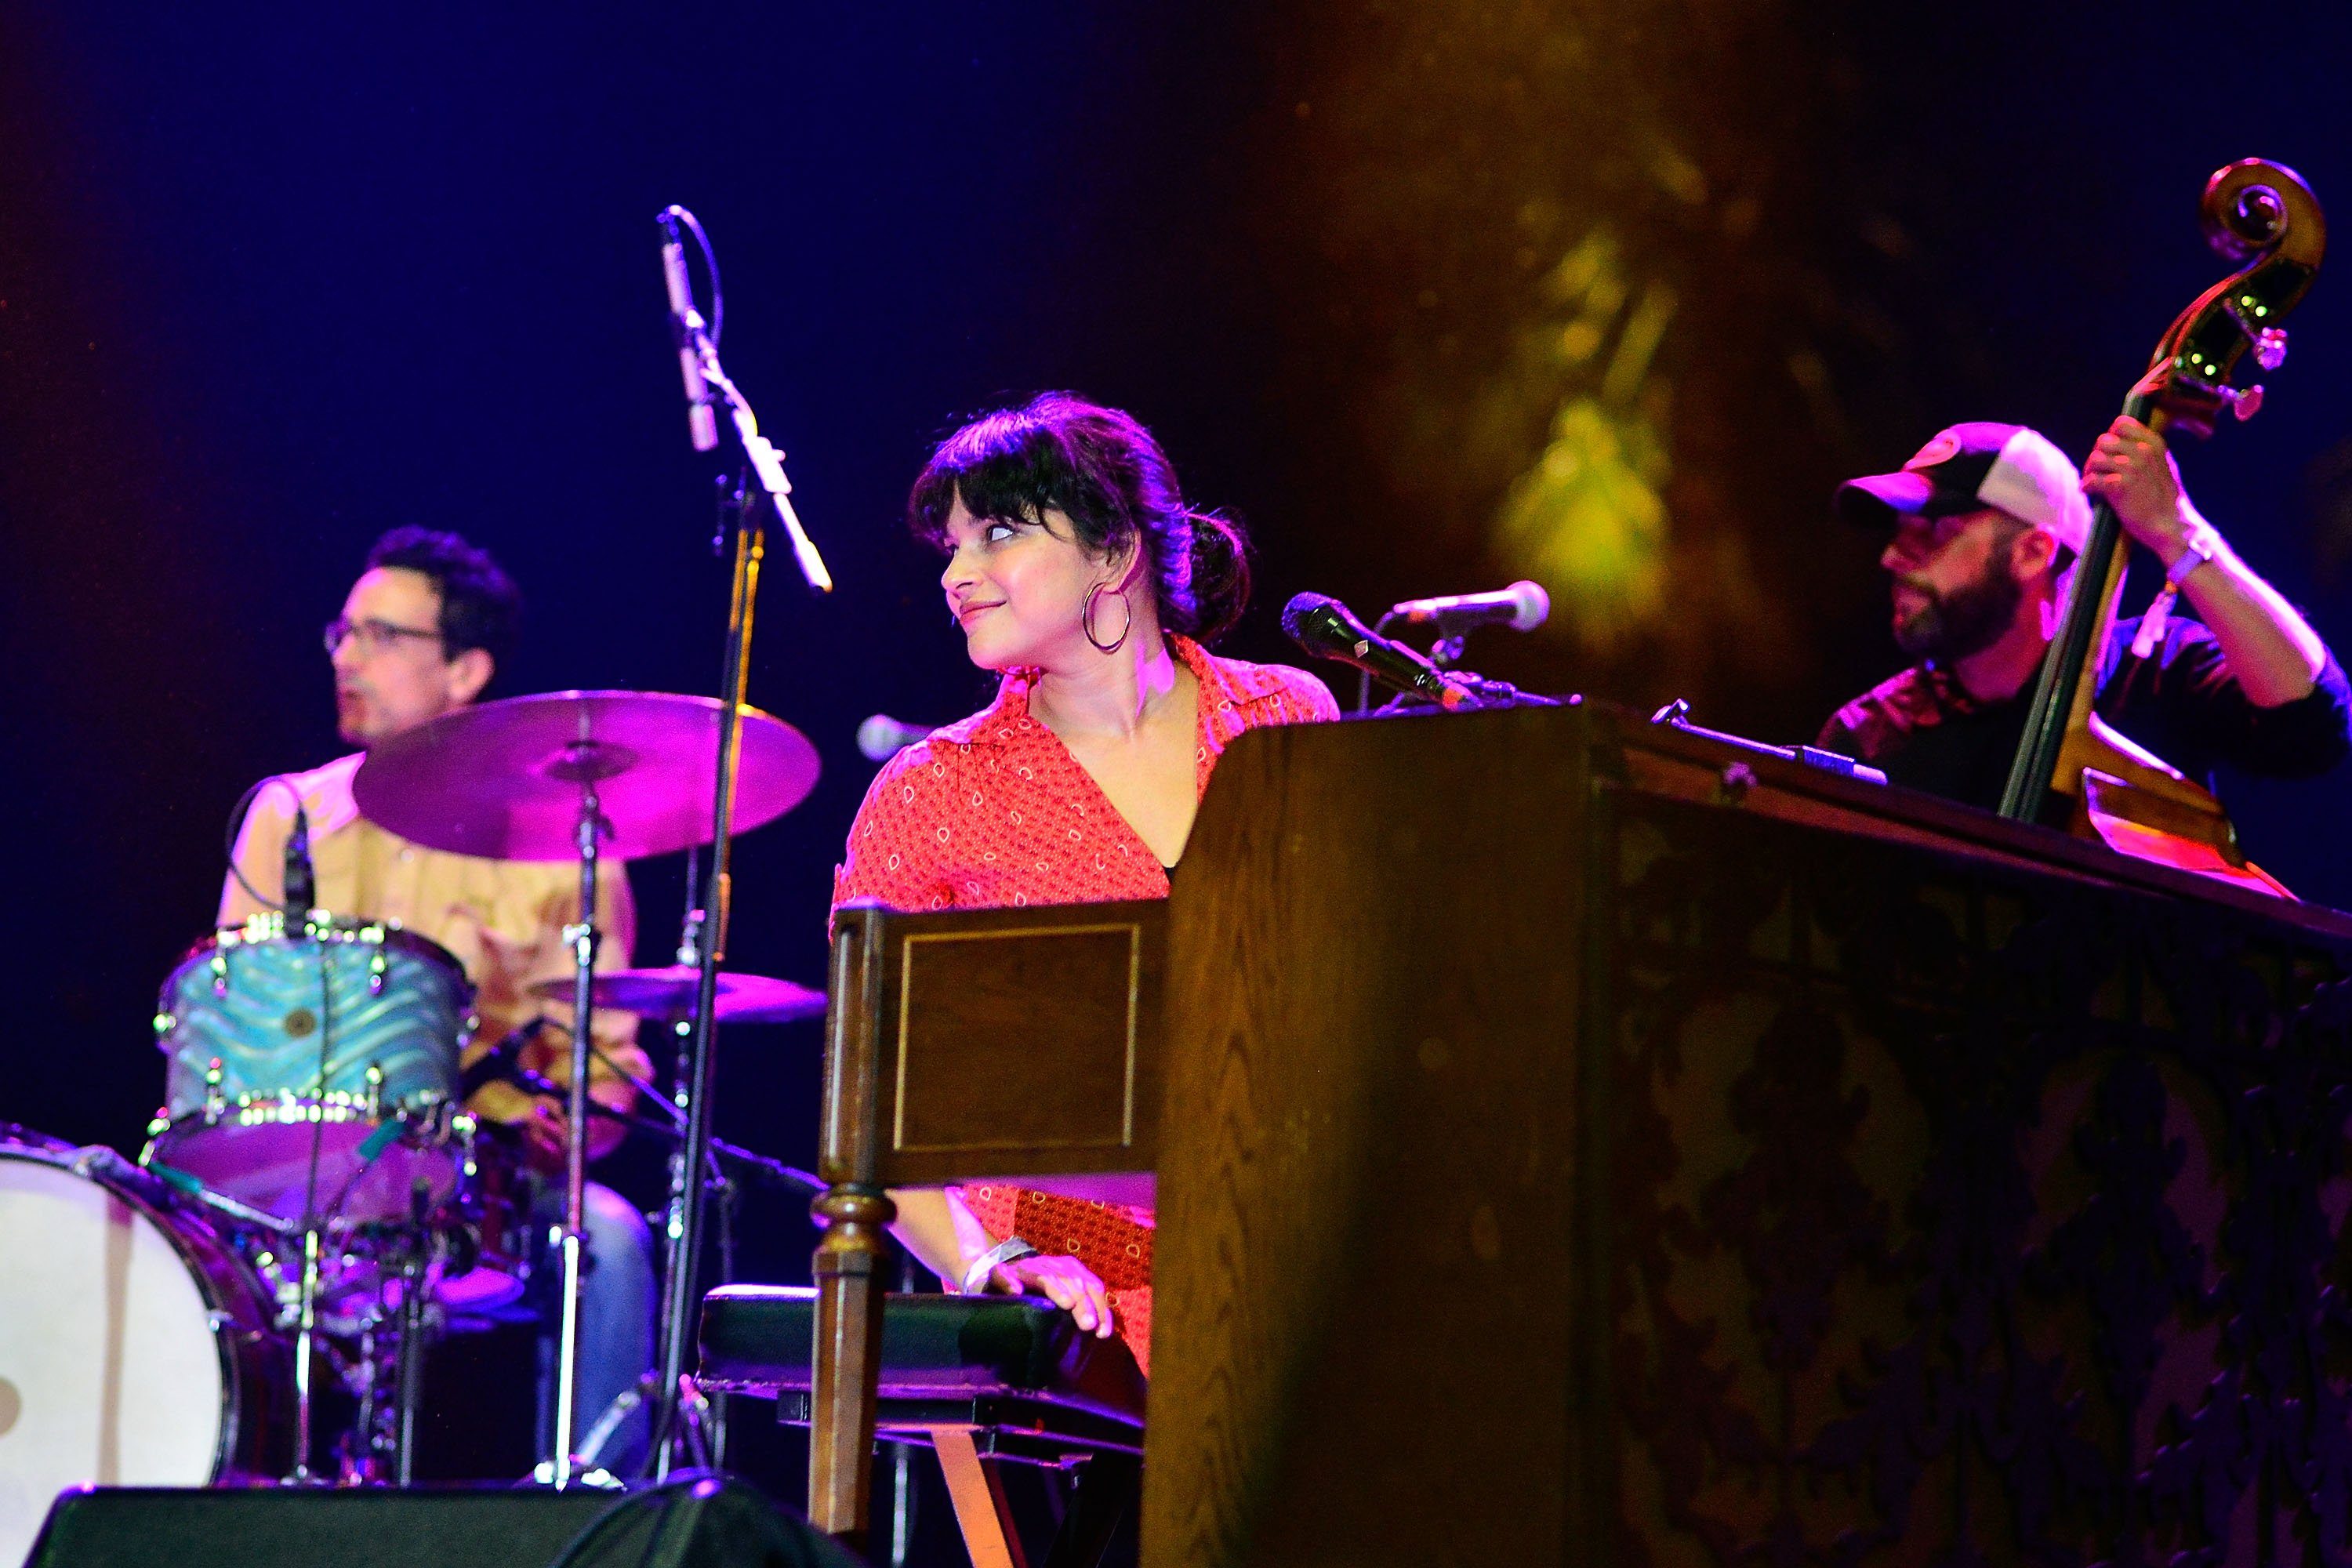 Dan Rieser, Norah Jones and Lee Alexander of The Little Willies during the 2013 Stagecoach Country Music Festival at The Empire Polo Club on April 26, 2013, in Indio, California. | Source: Getty Images